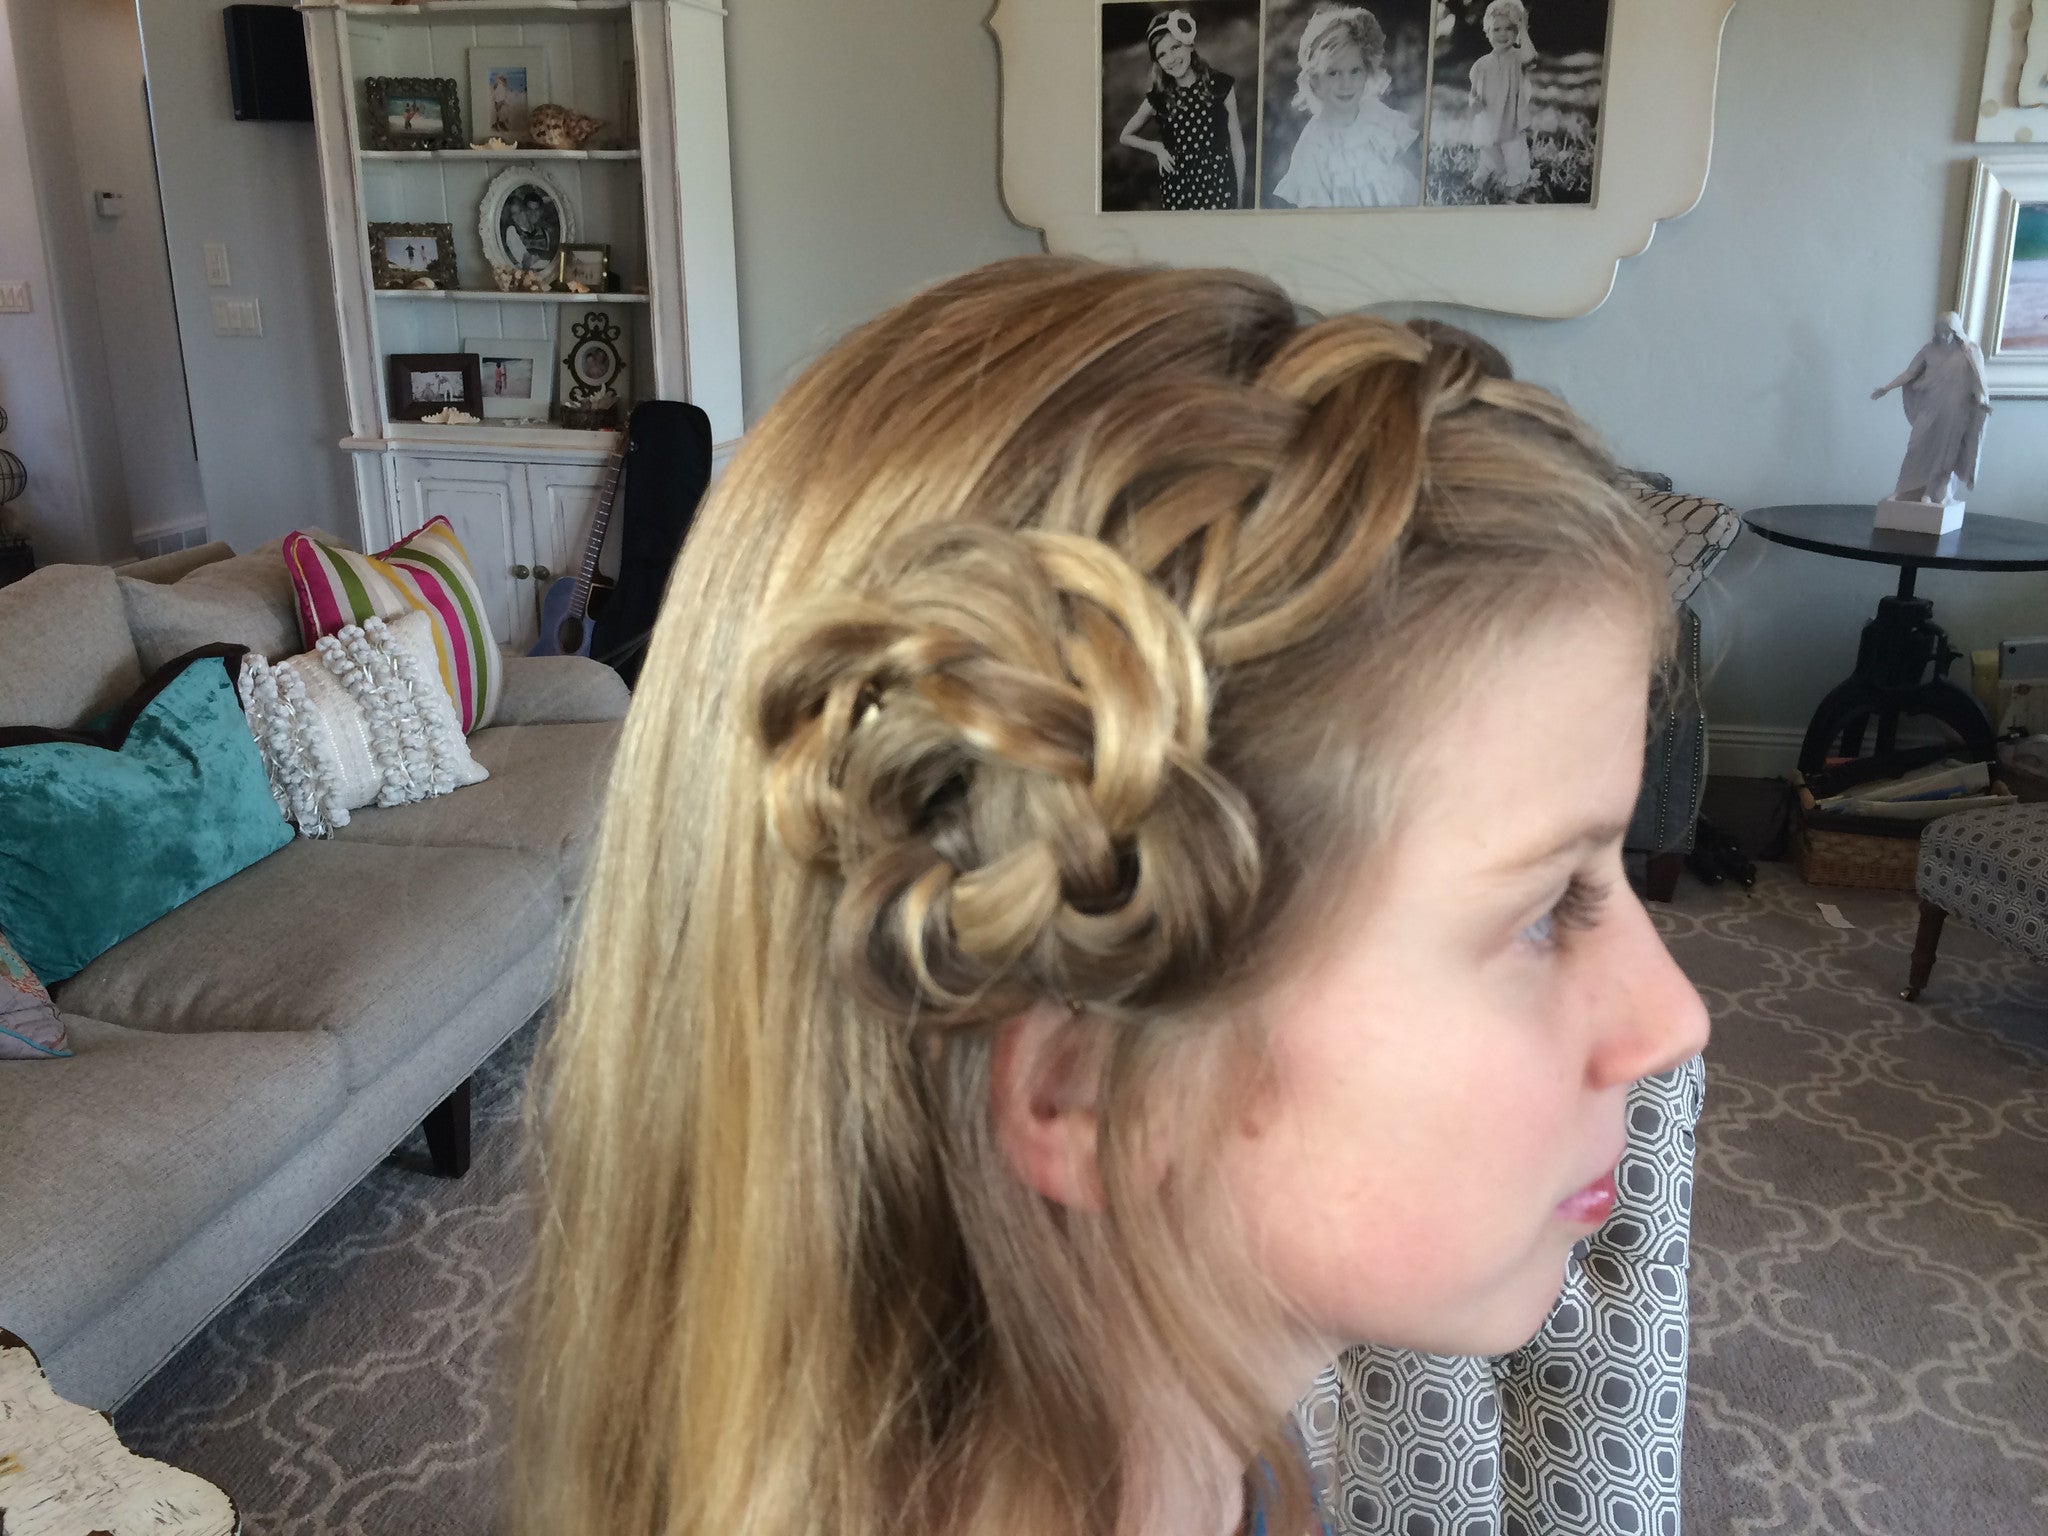 Inverted Flower Braid How-To For Family Photos